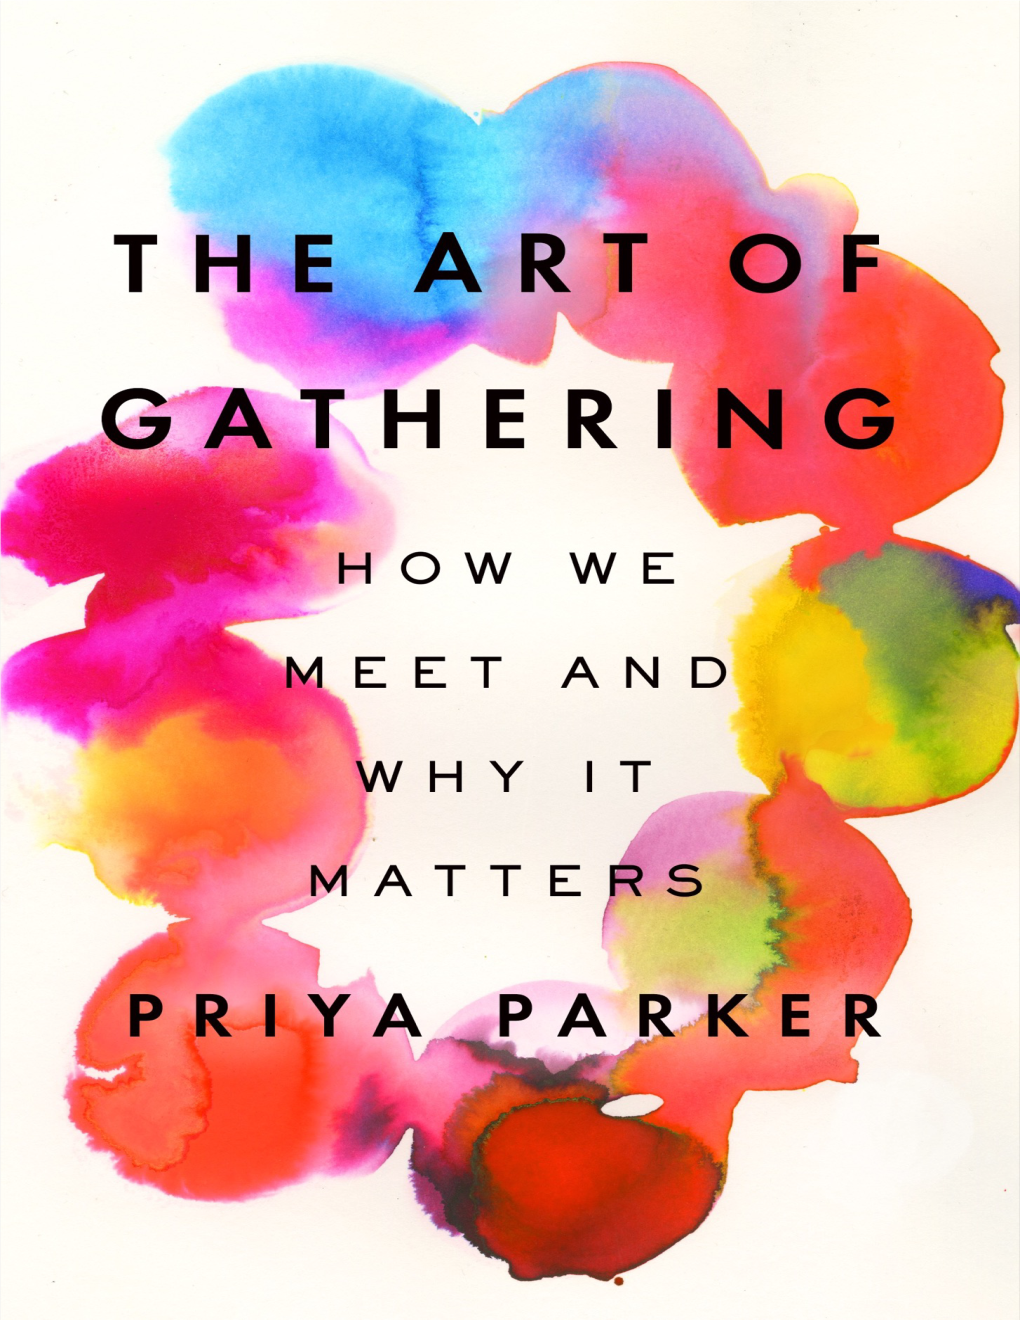 The Art of Gathering: How We Meet and Why It Matters / Priya Parker